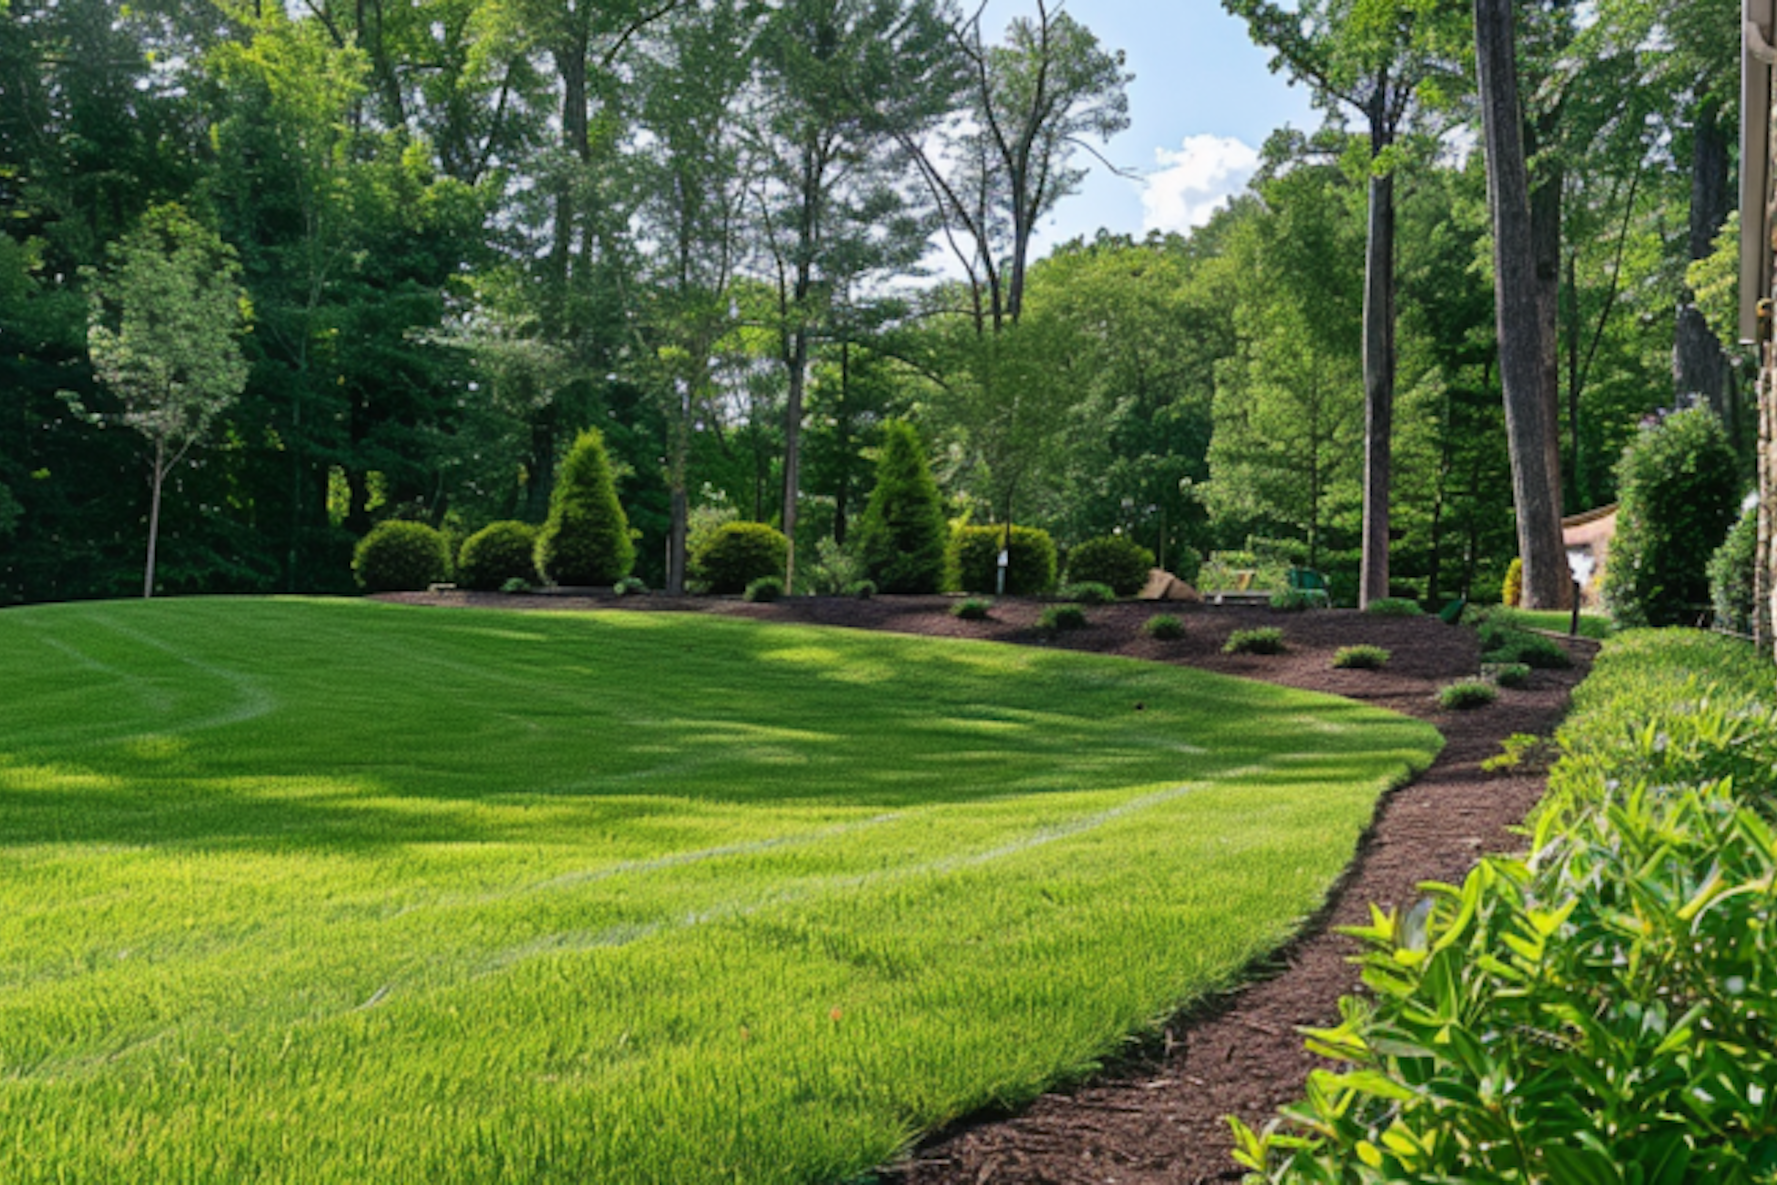 An effective way to prevent ticks in your yard is to keep up with your landscaping and lawn maintenance.